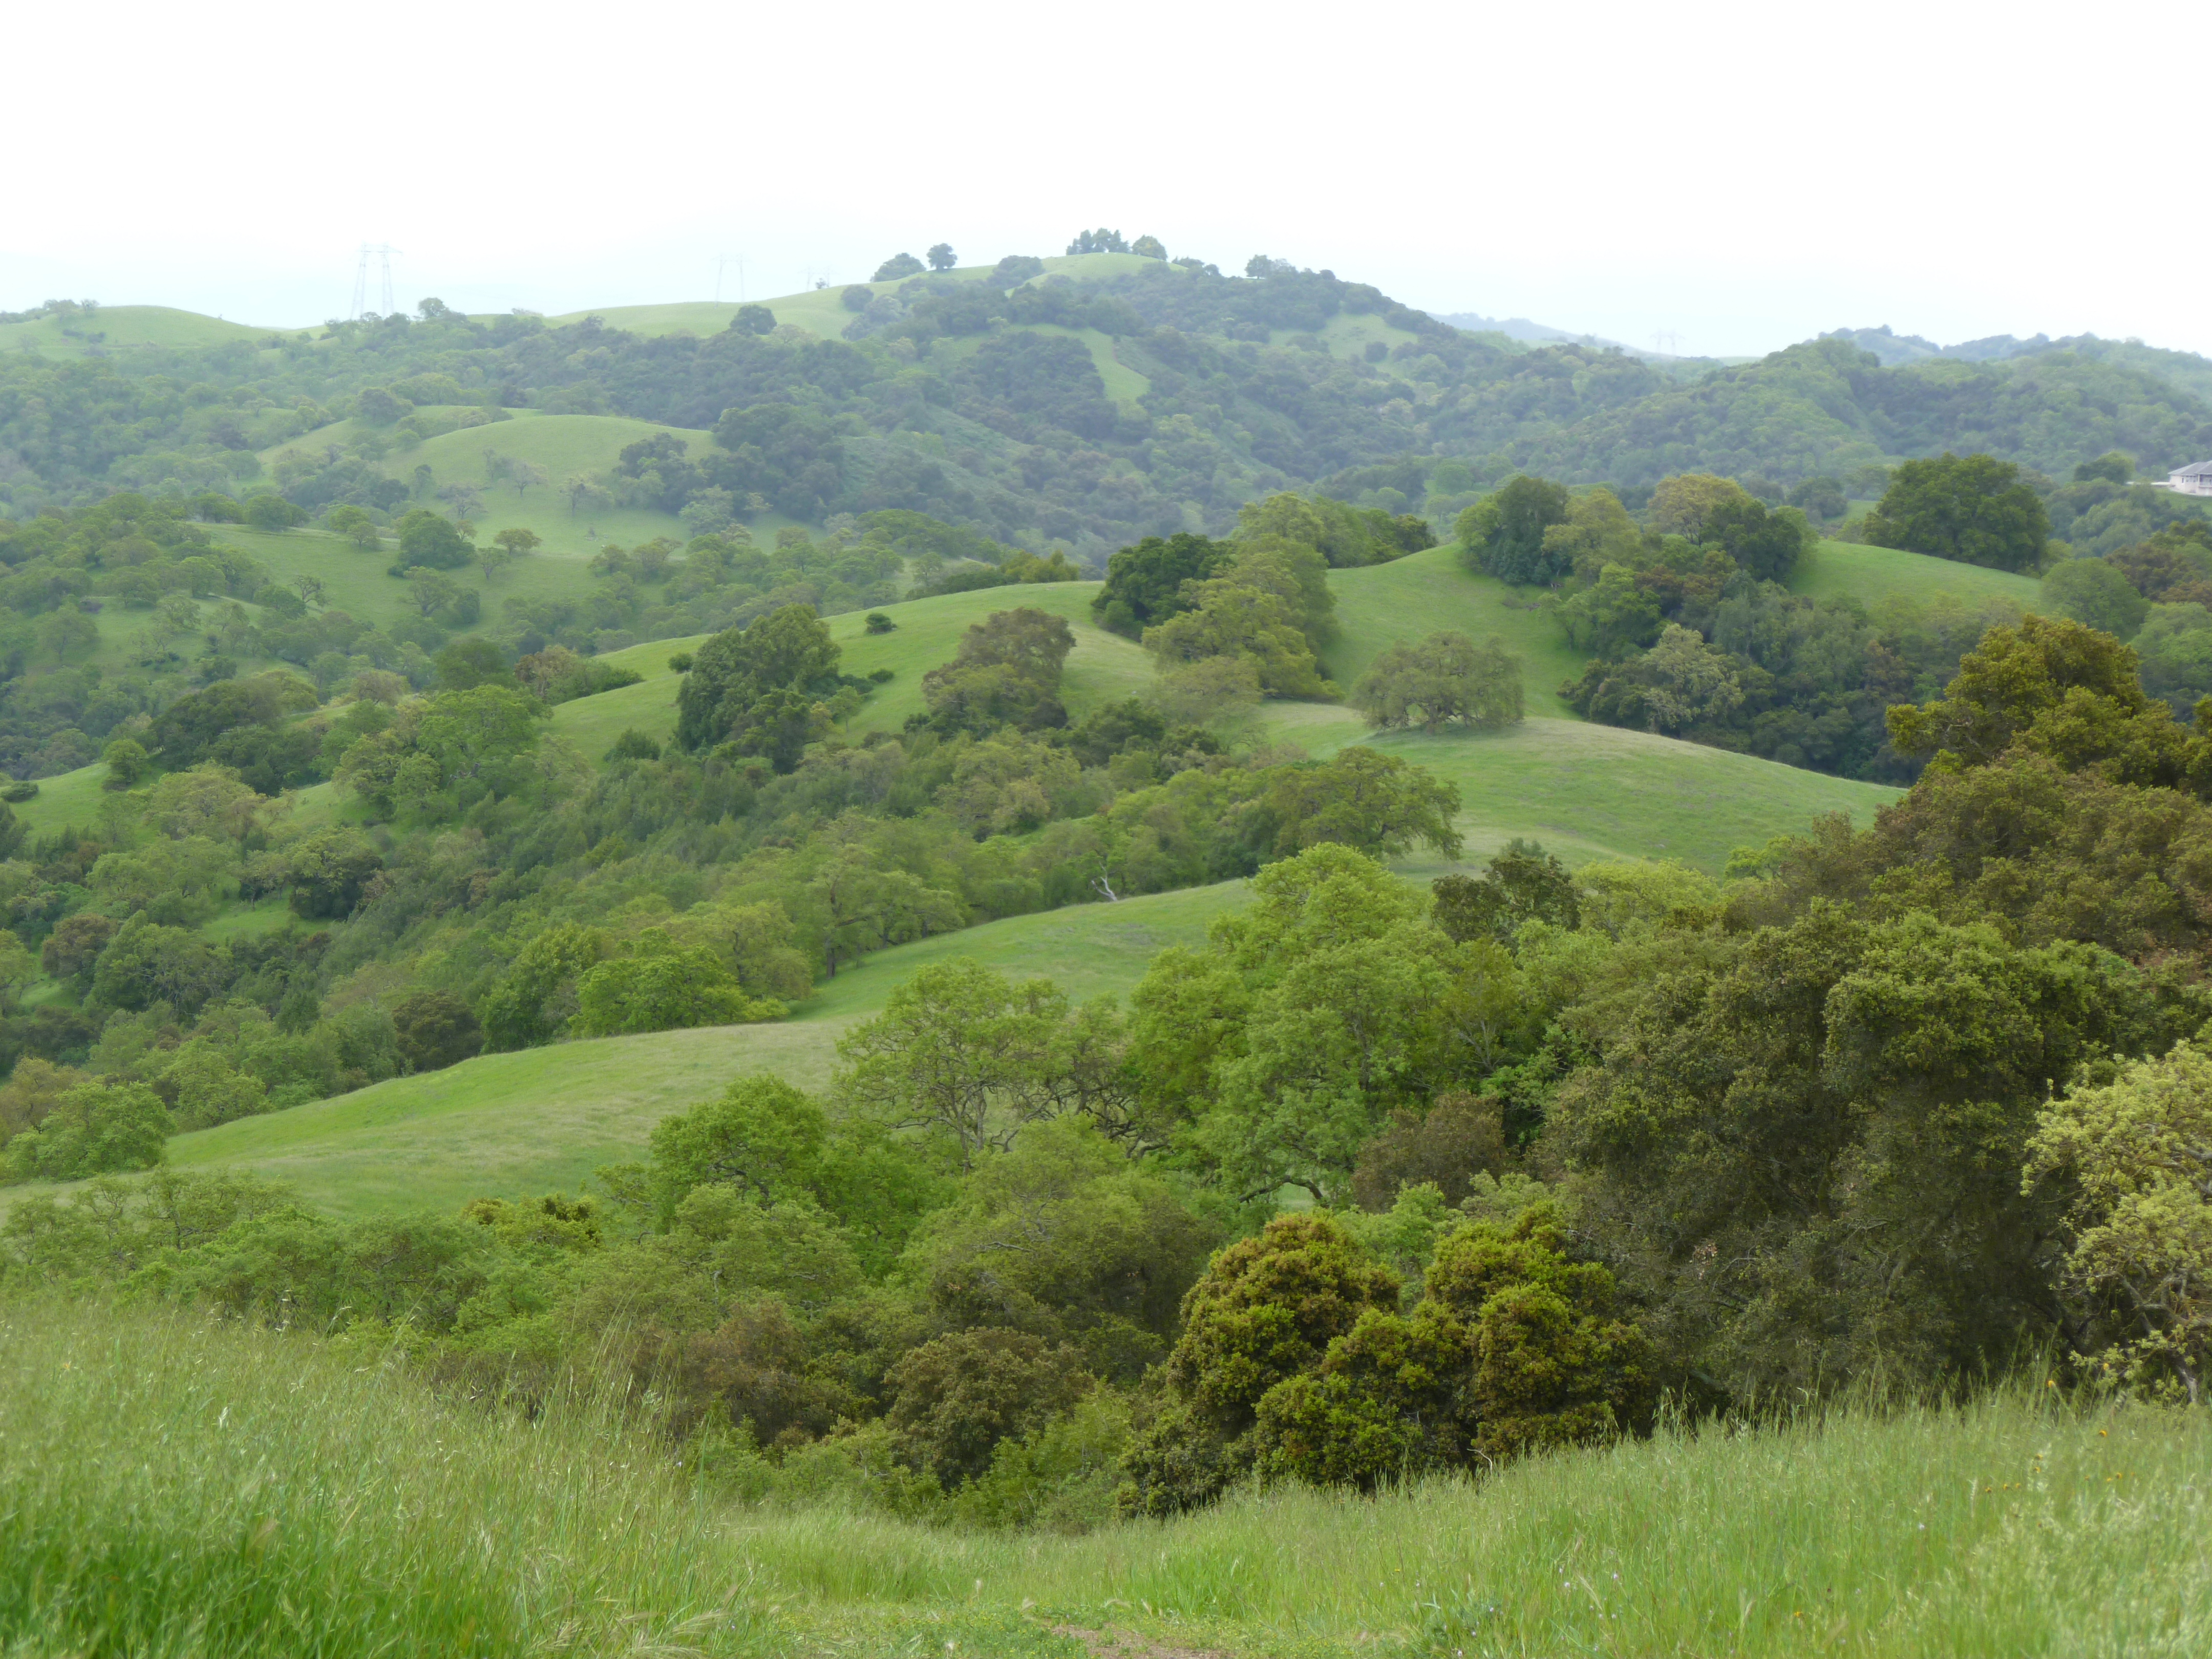 Hills in Calero Park covered in green grass, bushes, and trees on a cloudy day